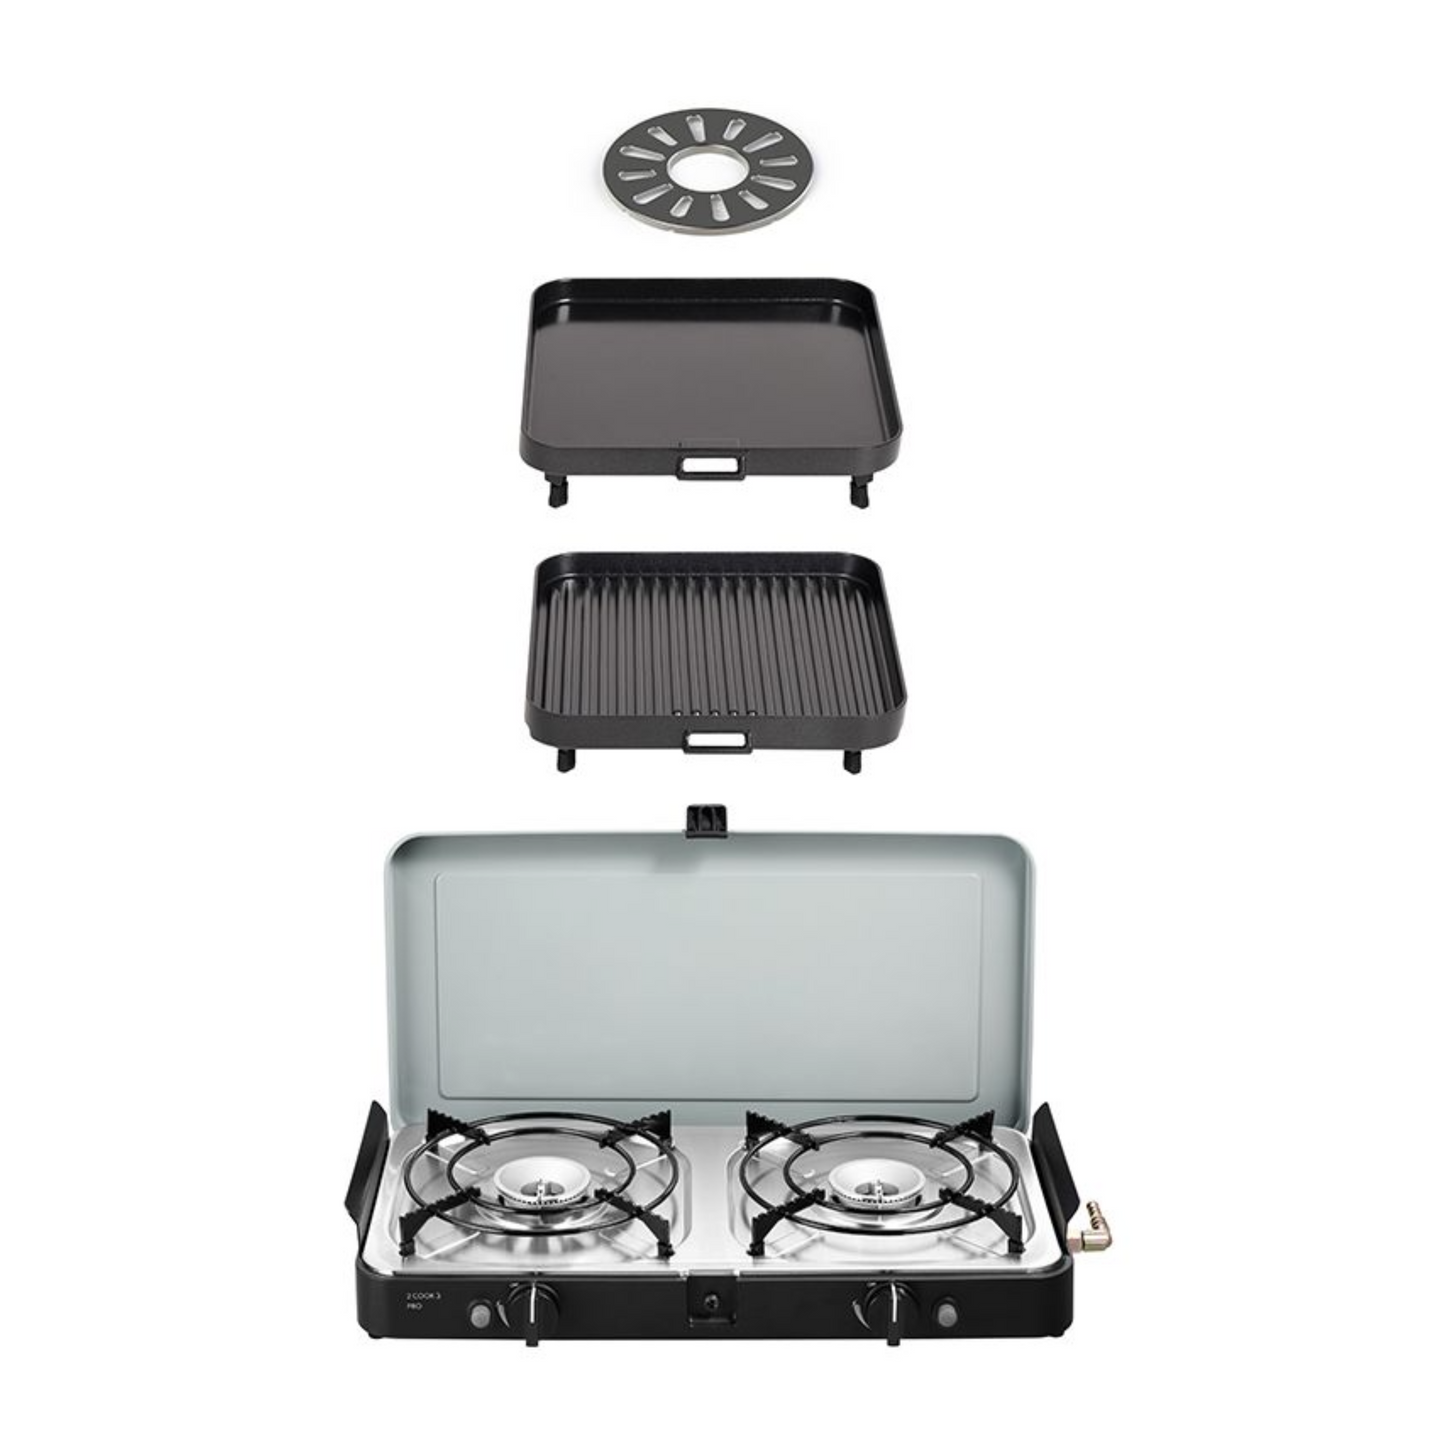 2 Cook 3 Pro Deluxe Portable Camp Cooker